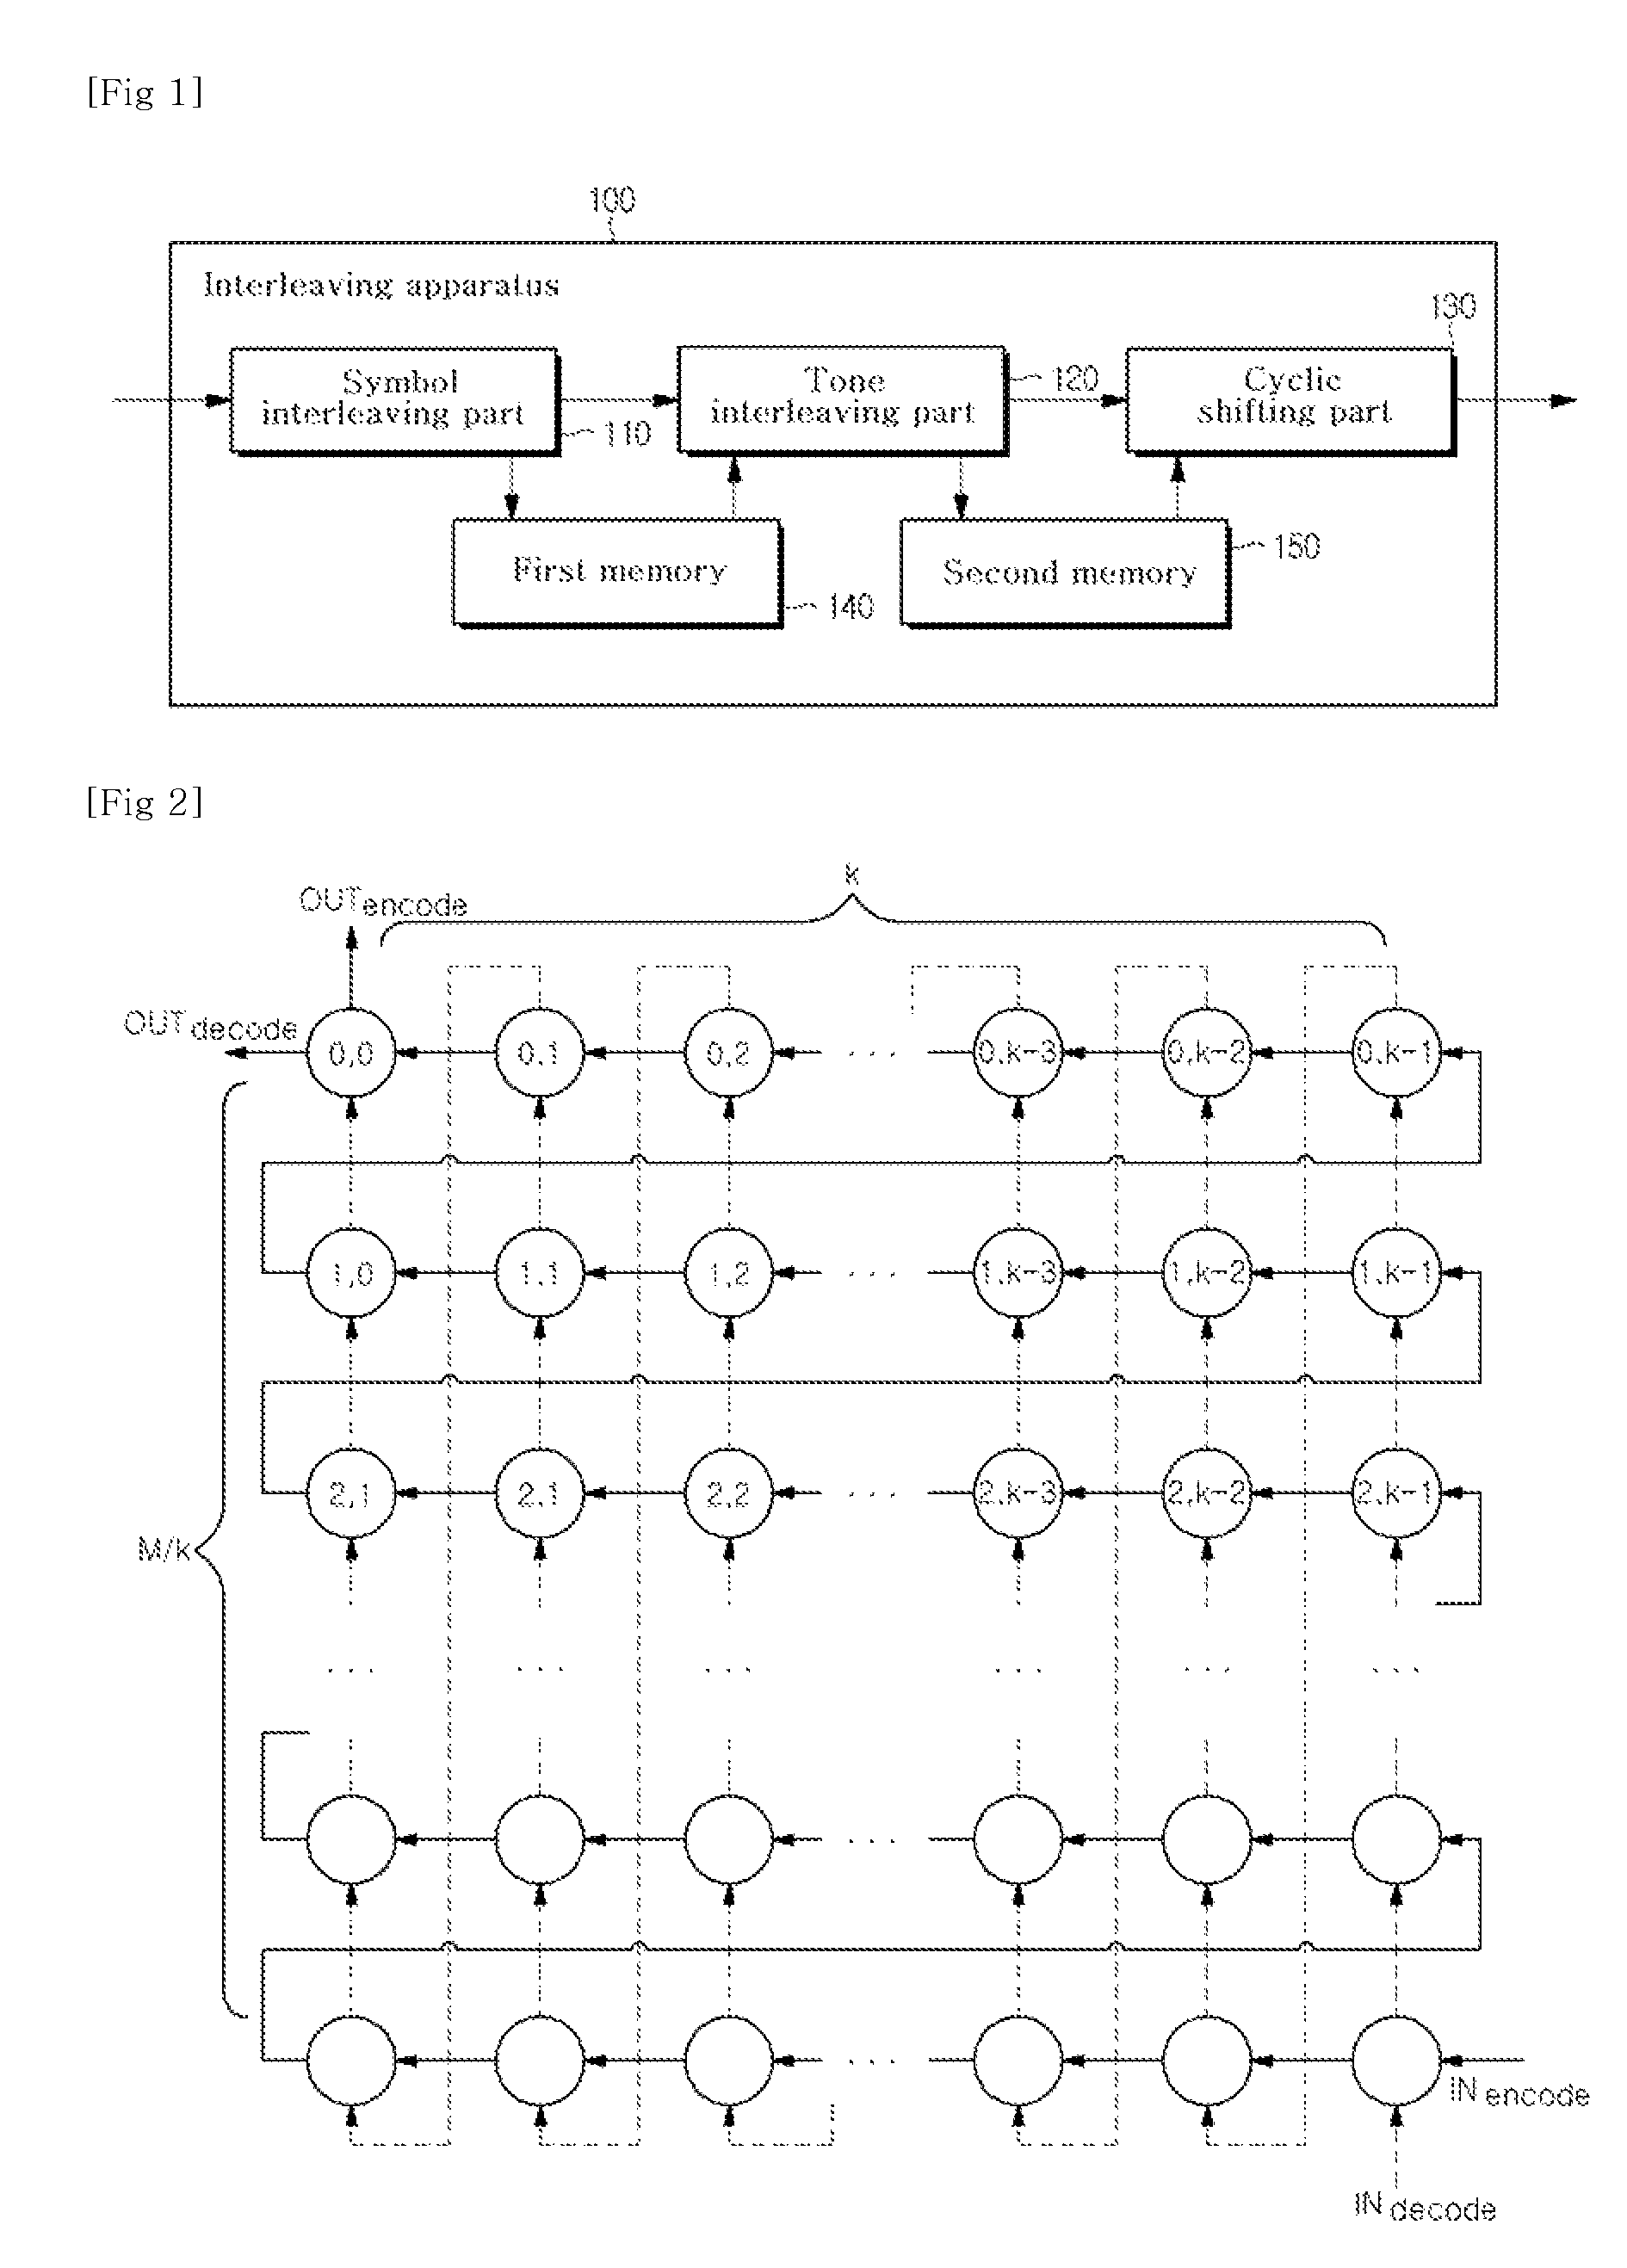 Apparatus and method for block interleaving using mixed radix system in MB-OFDM